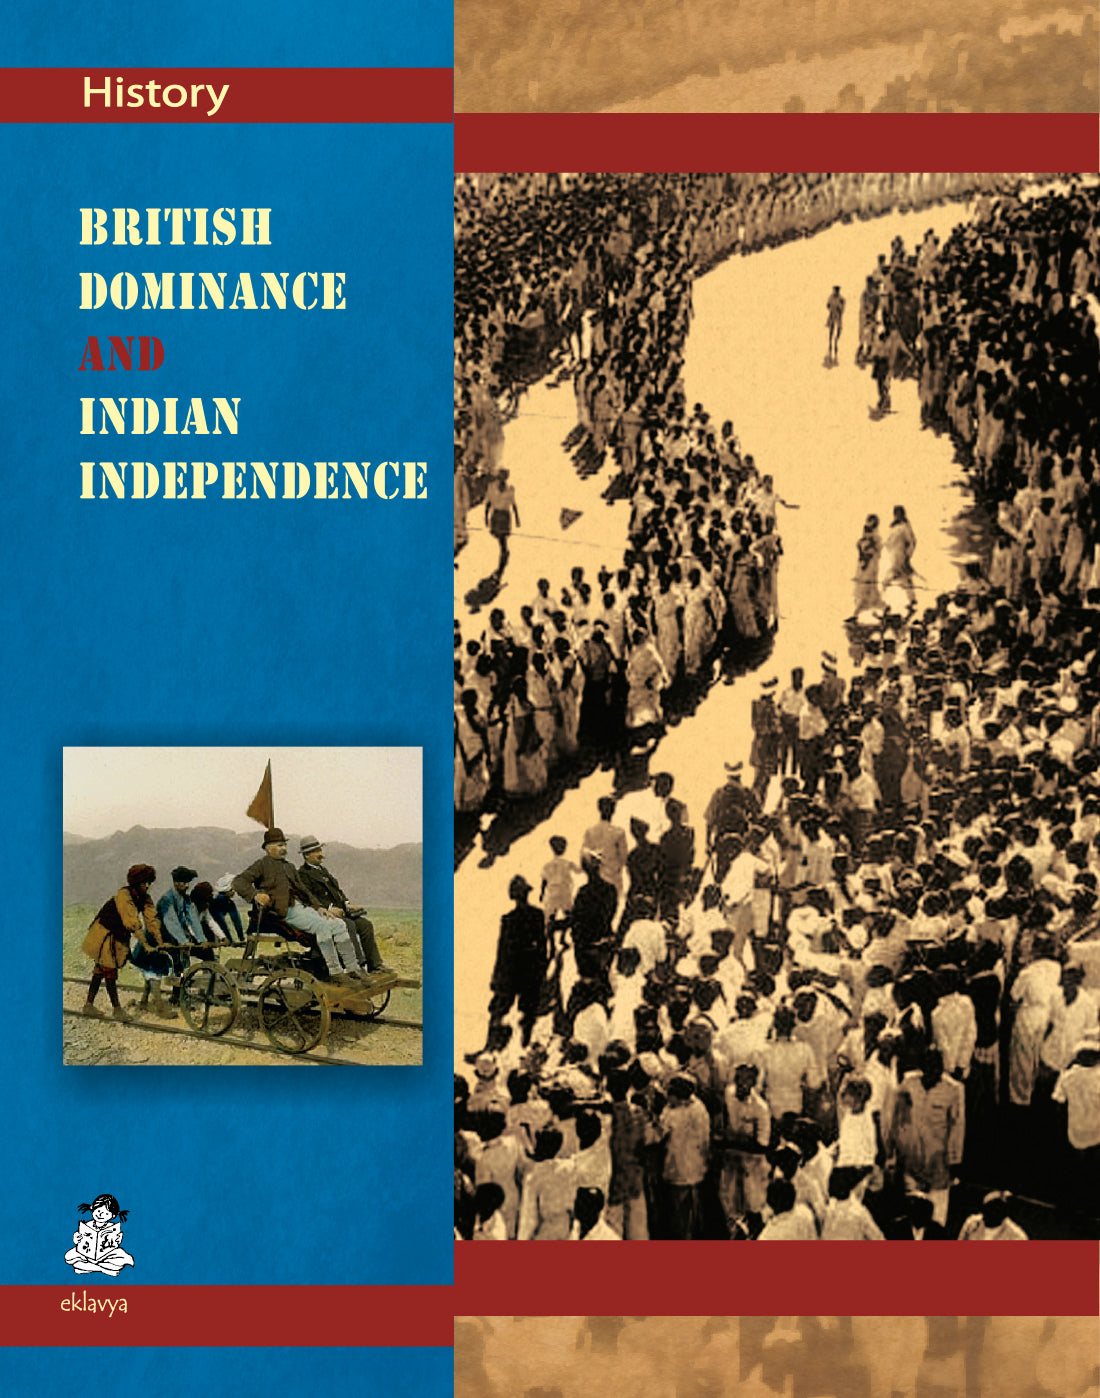 Indias Independence From Britain, Division & History - Lesson